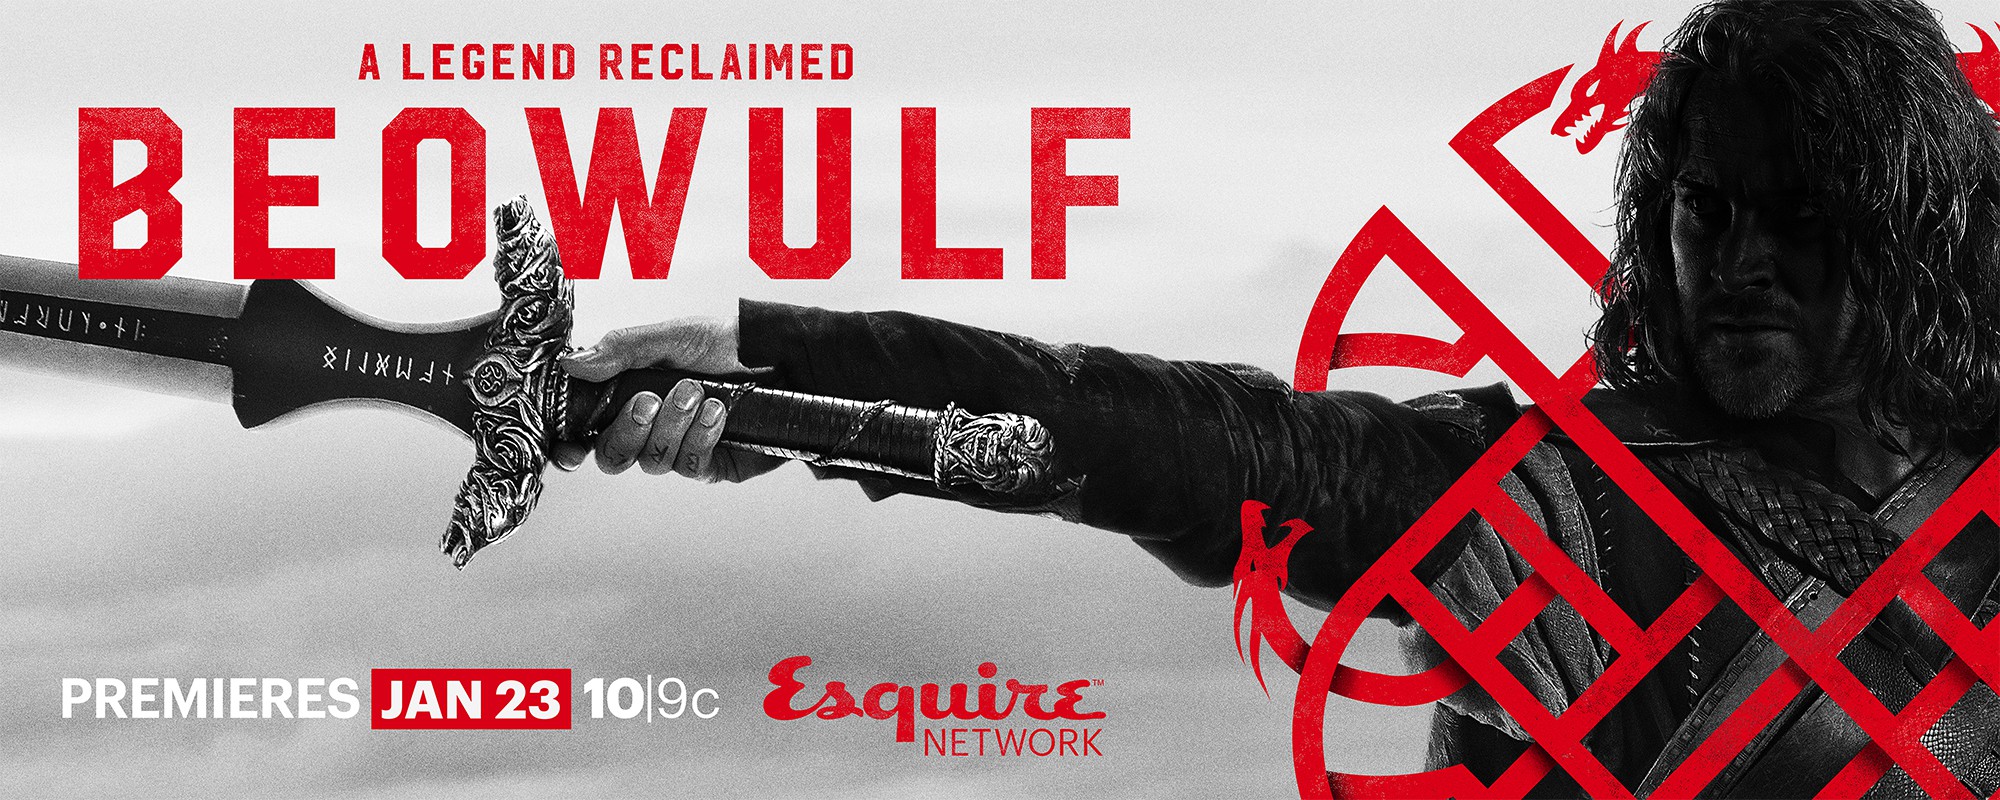 Mega Sized TV Poster Image for Beowulf (#2 of 2)